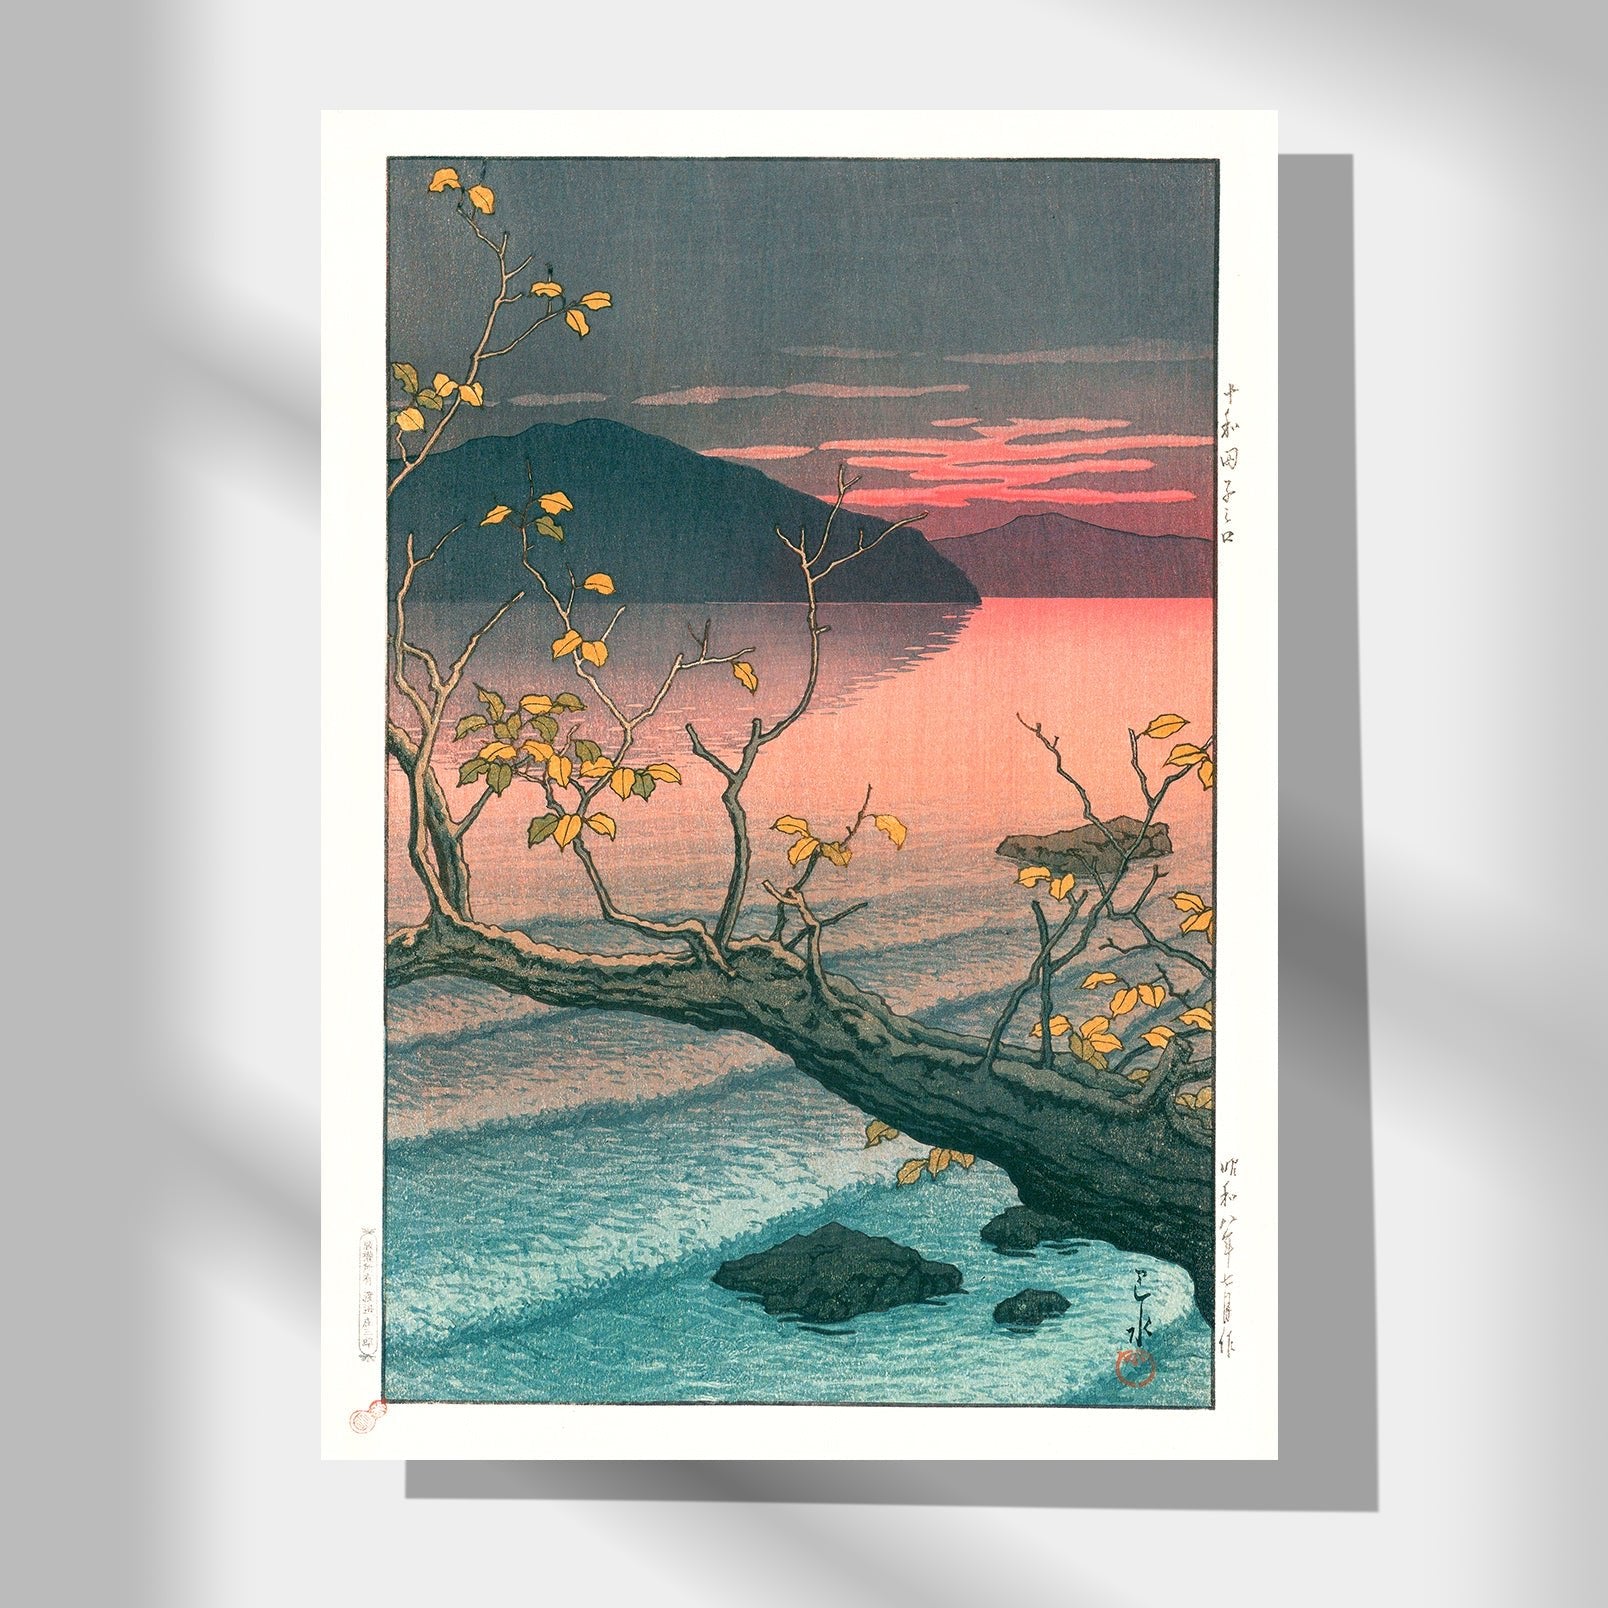 A Japanese Art Poster by Kawase Hasui, depicting a tree and mountain at sunset with vibrant autumn leaves